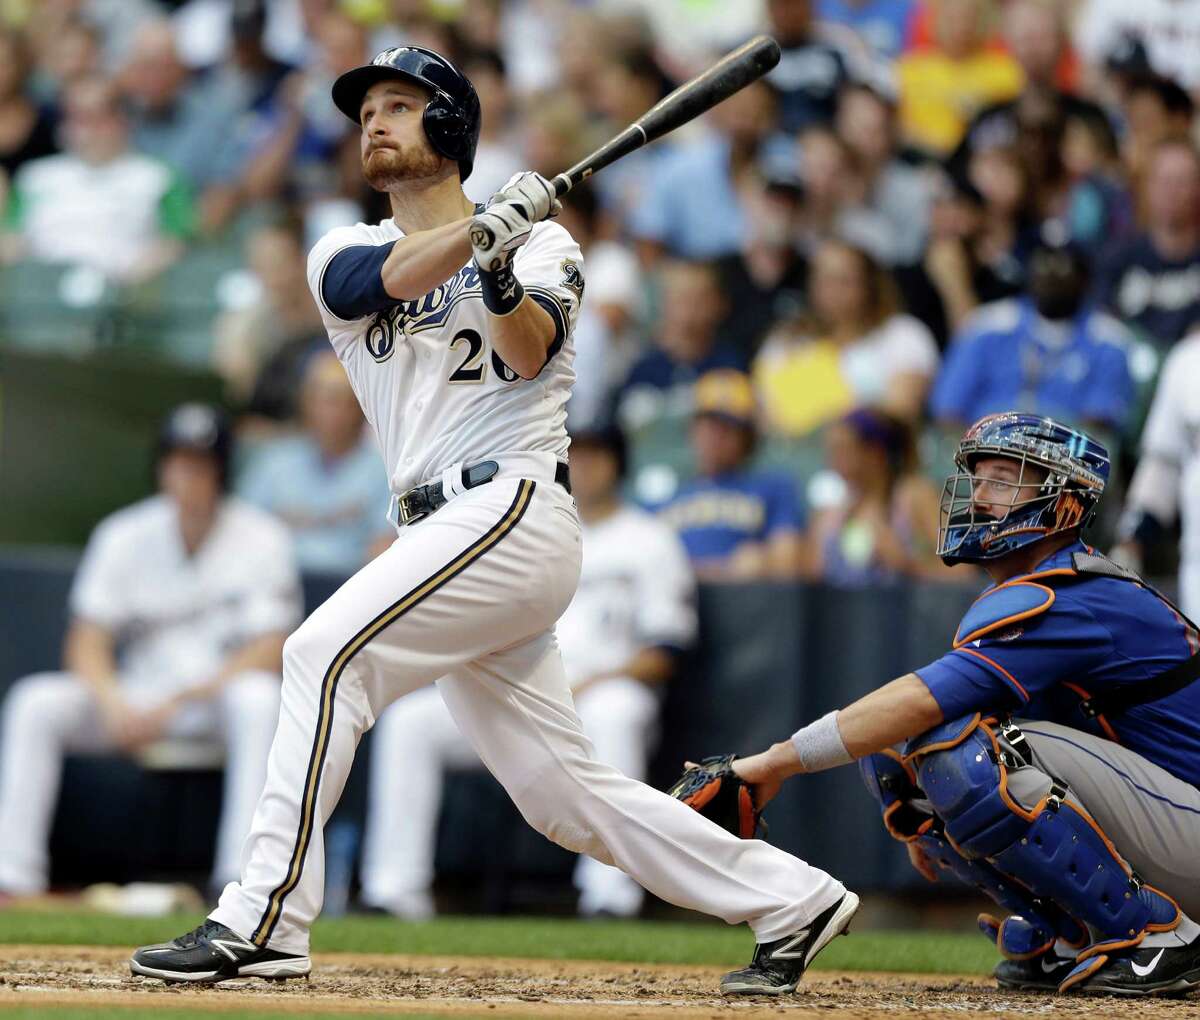 Milwaukee Brewers' Jonathan Lucroy, left, watches his home run against the New York Mets during the third inning of a baseball game on Saturday, July 6, 2013, in Milwaukee. (AP Photo/Jeffrey Phelps) ORG XMIT: WIJP105